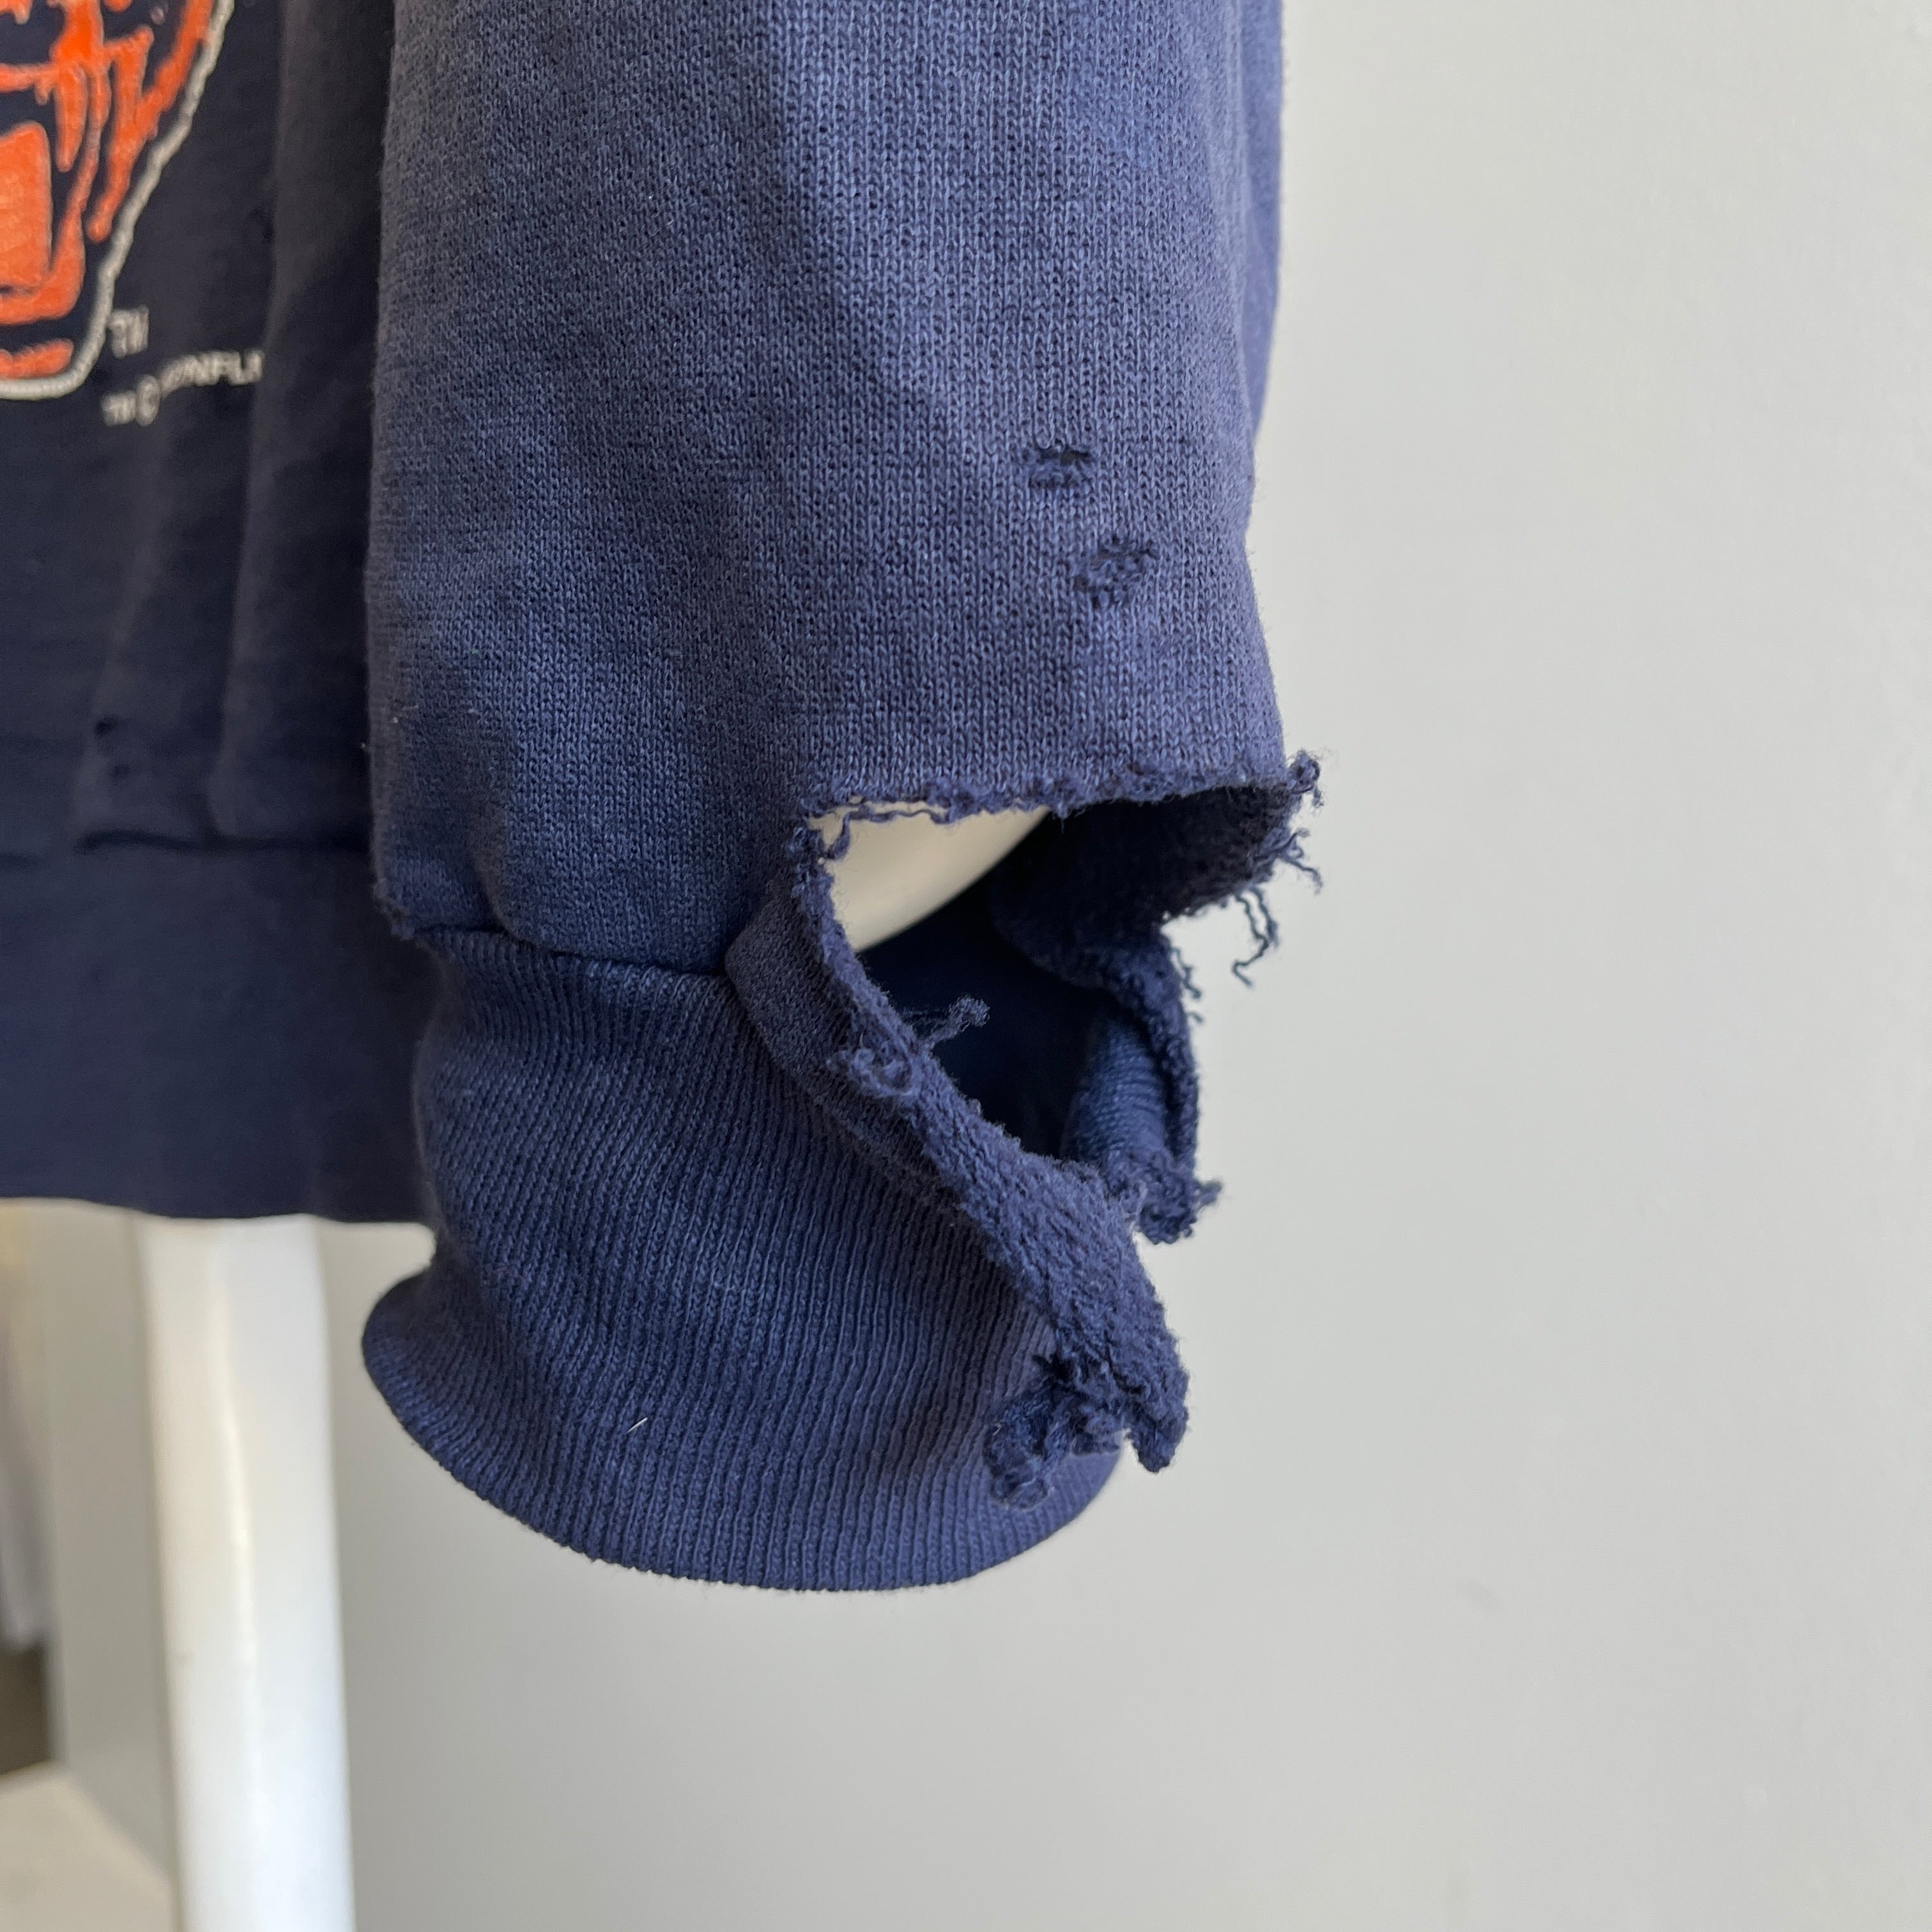 1992 Chicago Bears Lucky Game Day Sweatshirt - Thrashed